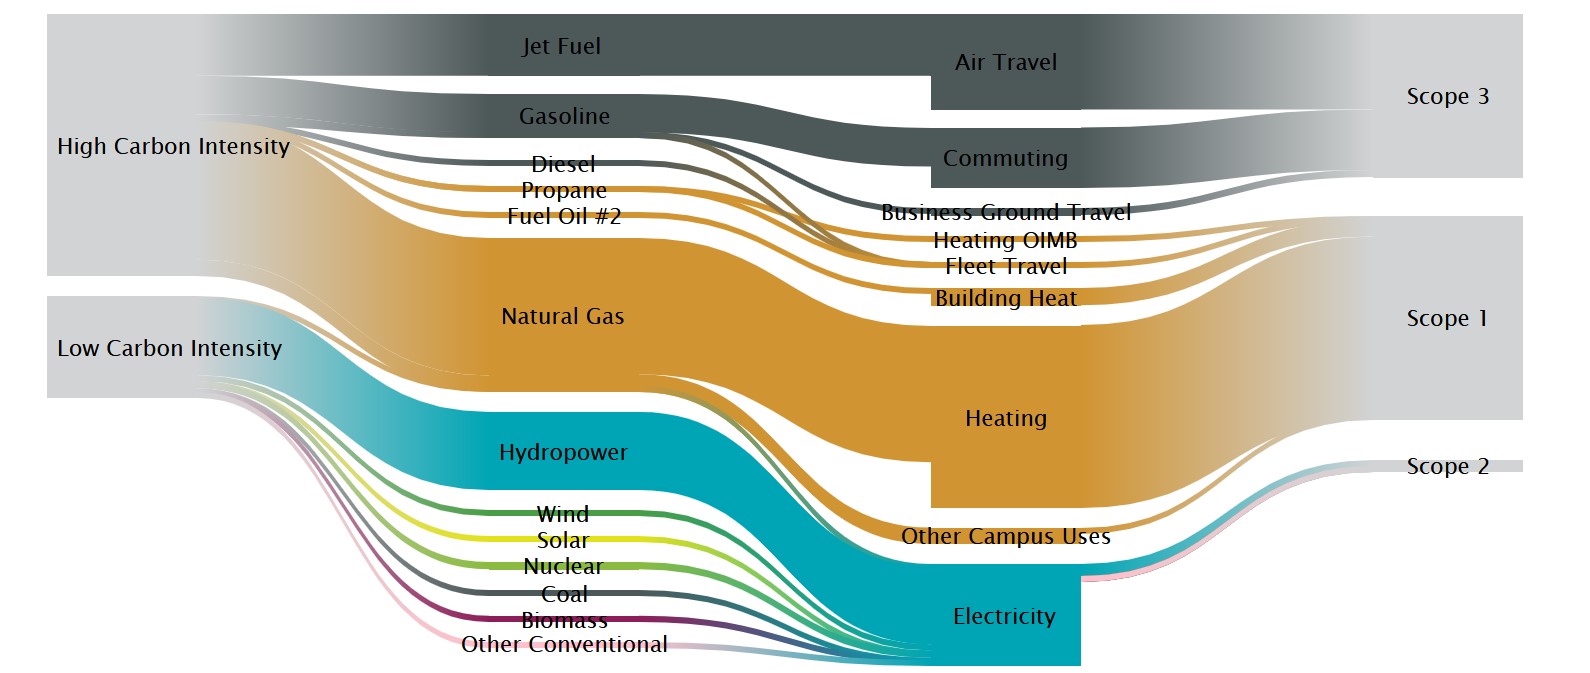 Diagram of the University of Oregon energy flow from 2018 with inputs, activities, and emissions